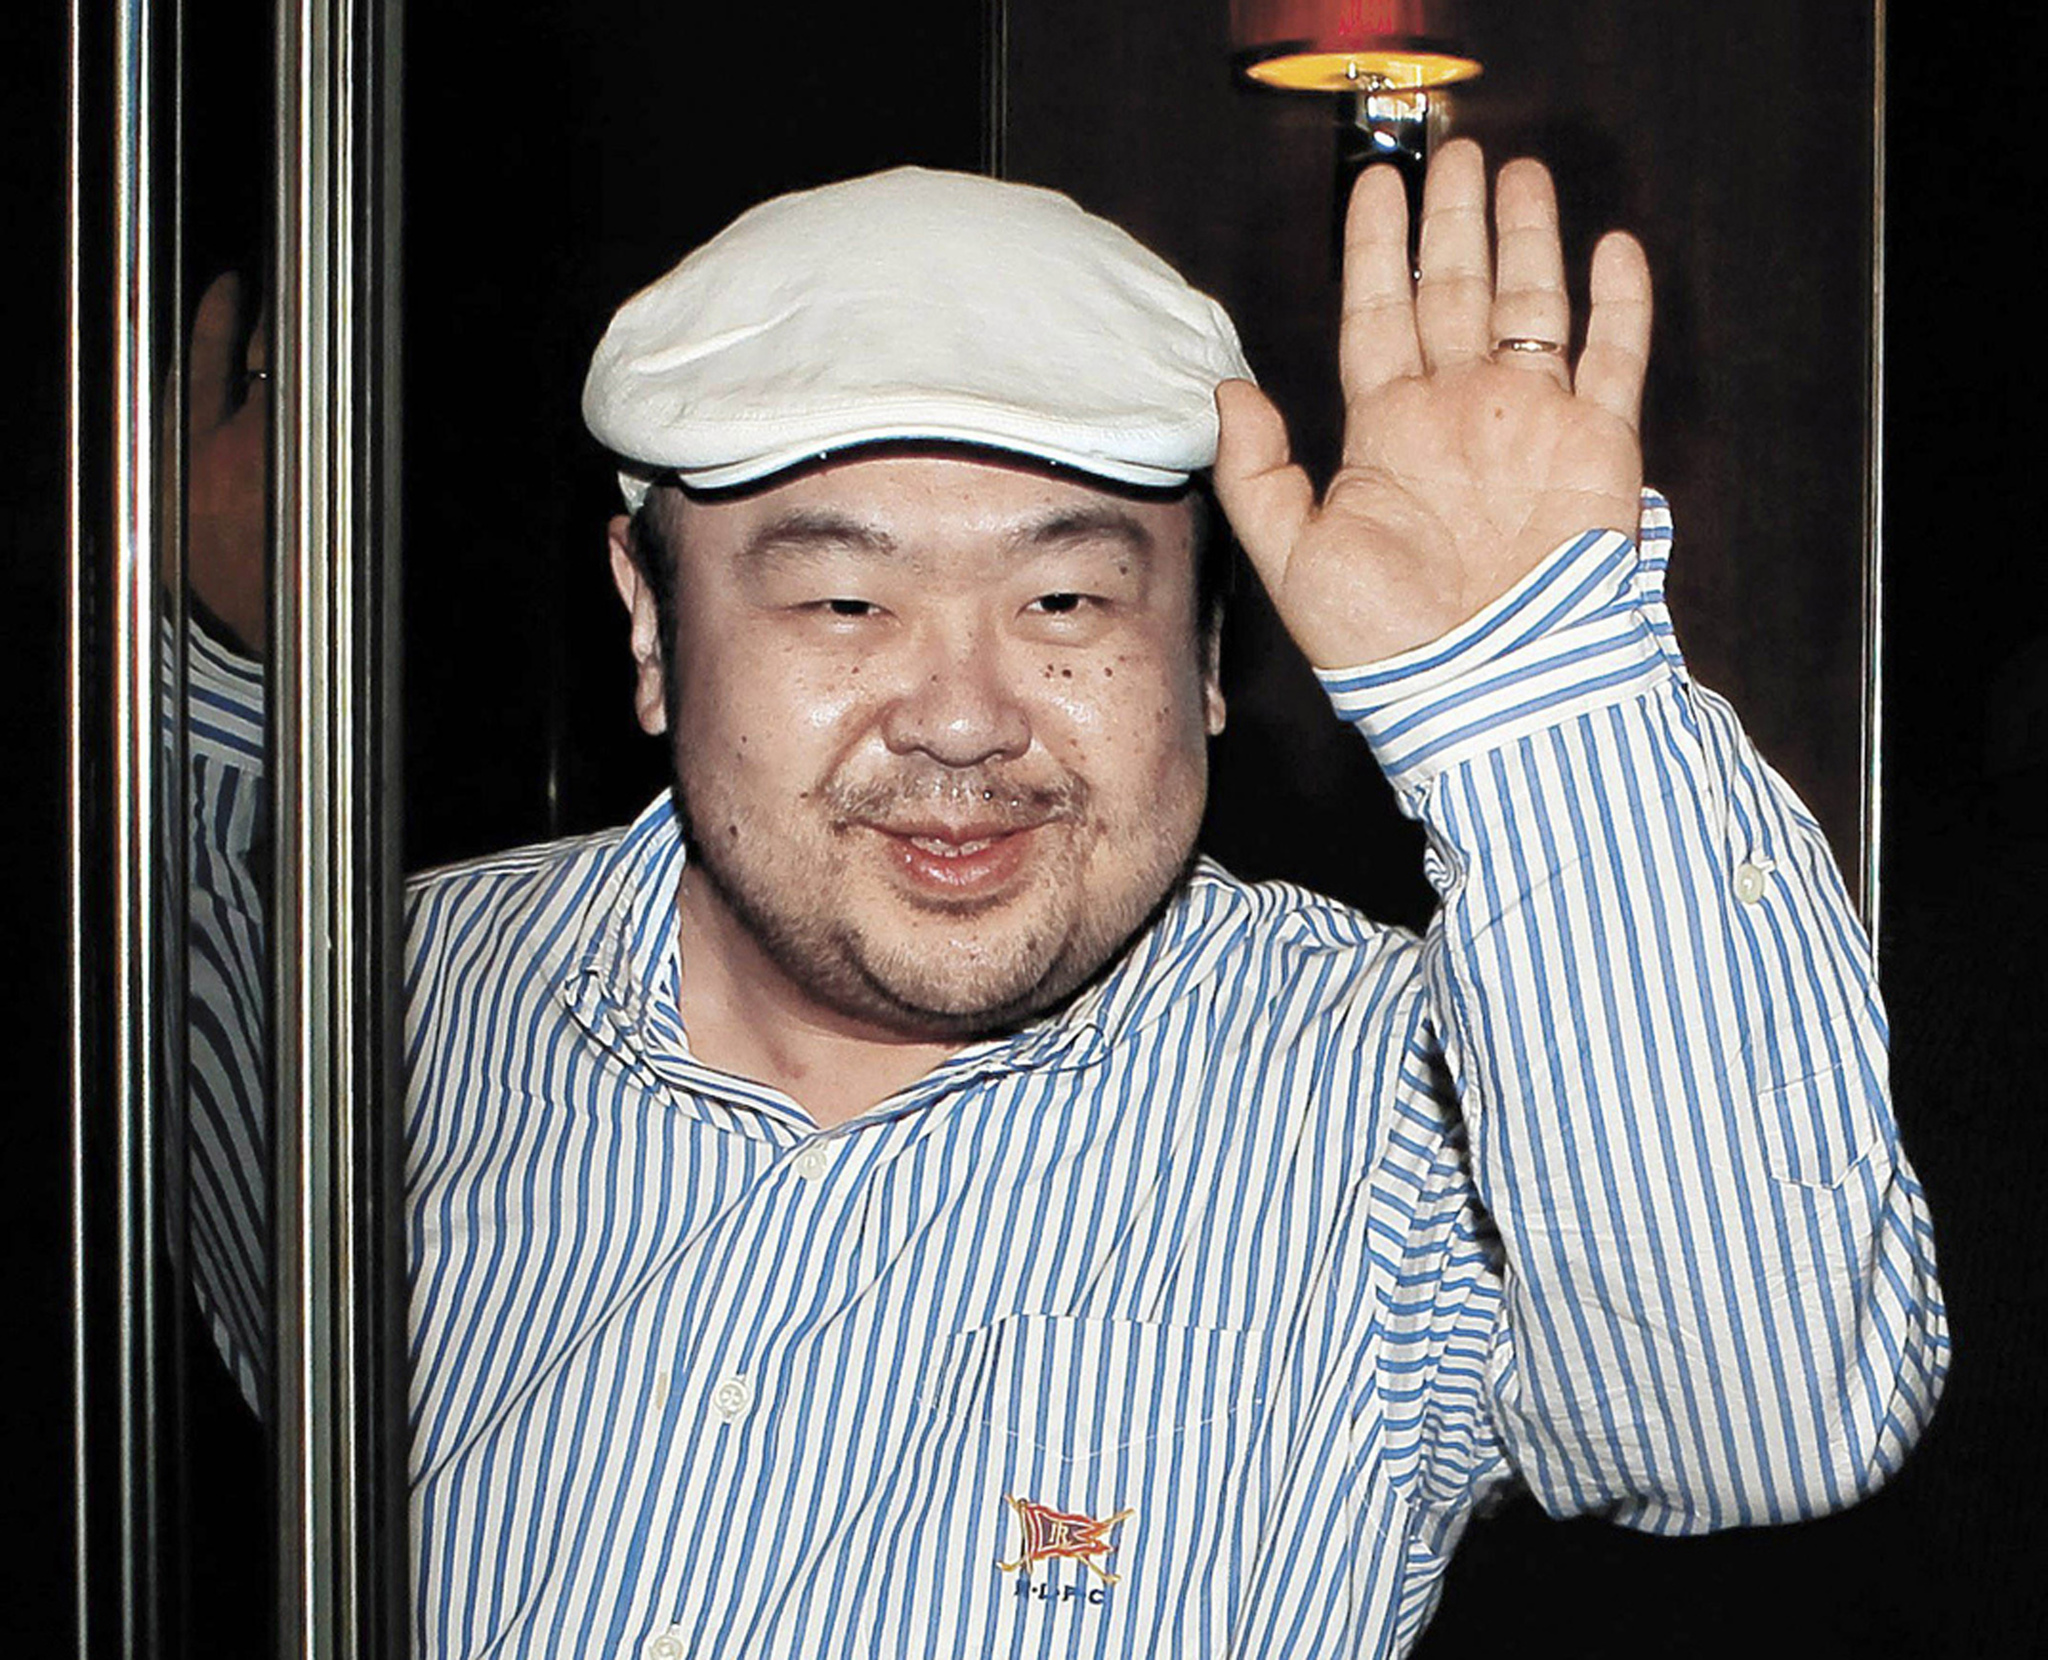 In this June 4, 2010 photo, dressed in jeans and blue suede loafers, Kim Jong Nam, the eldest son of then North Korean leader Kim Jong Il, waves after his first-ever interview with South Korean media in Macau. (Shin In-seop | JoongAng Ilbo)